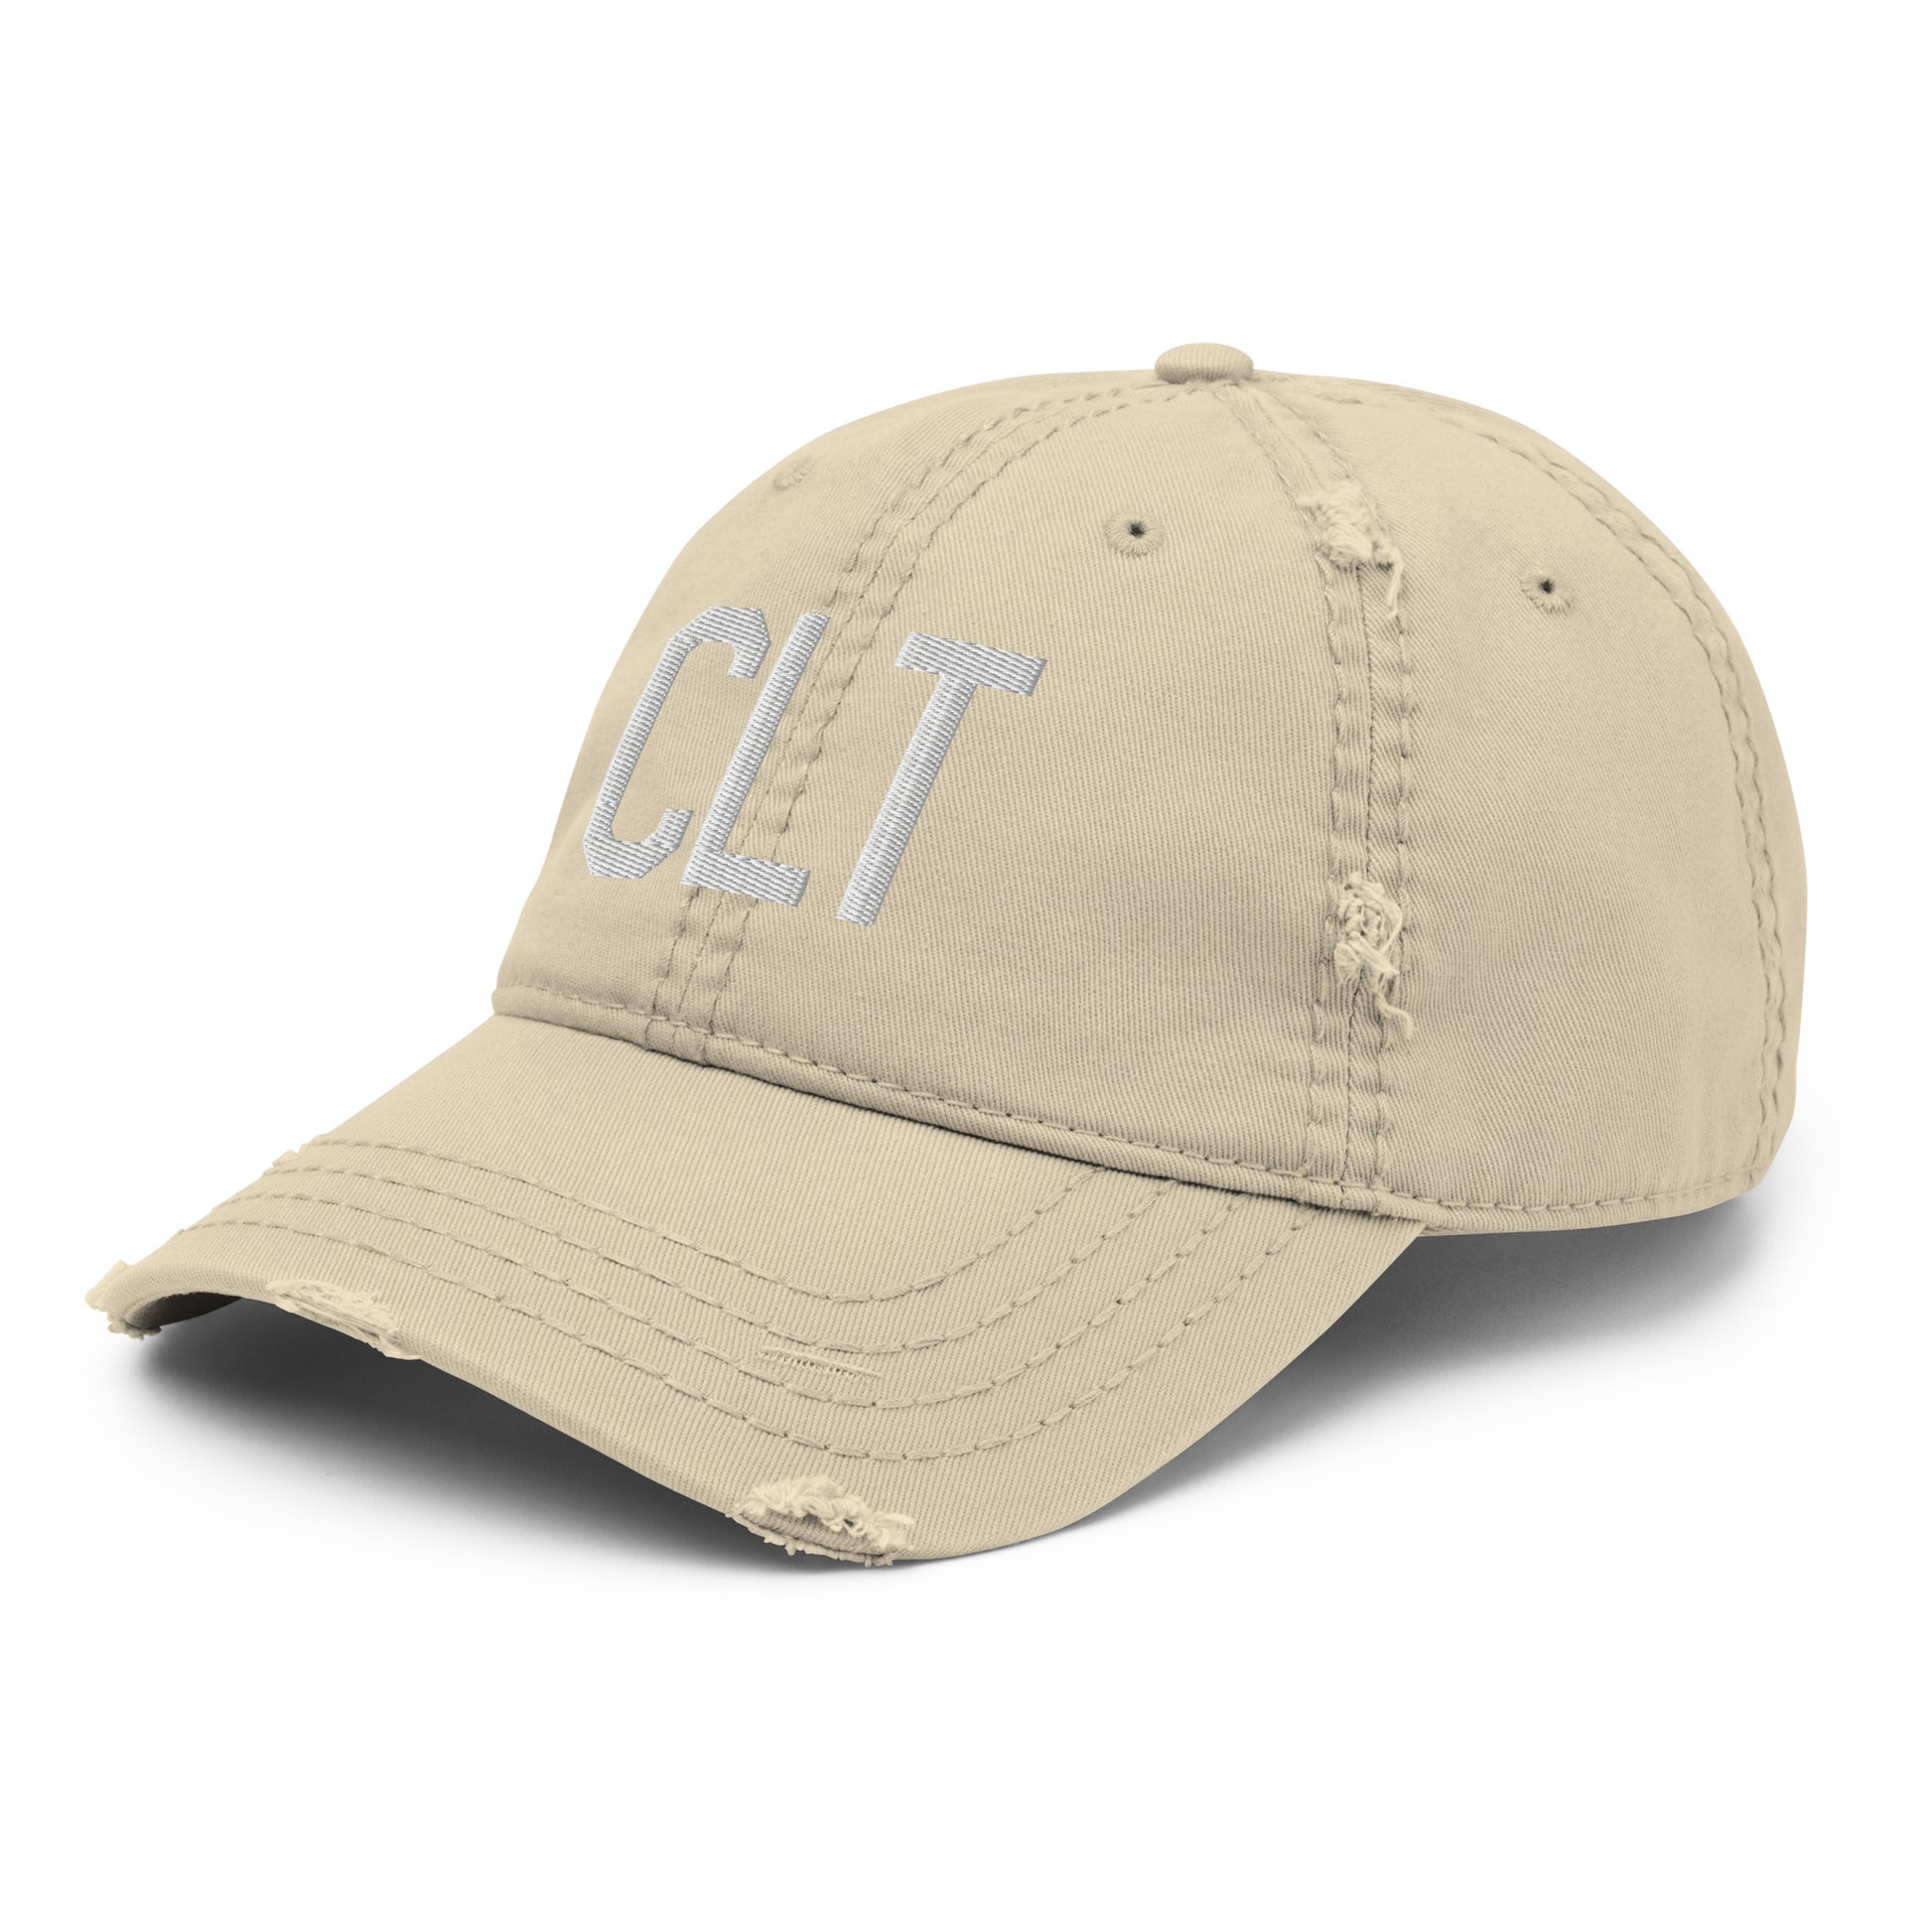 Airport Code Distressed Hat - White • CLT Charlotte • YHM Designs - Image 19